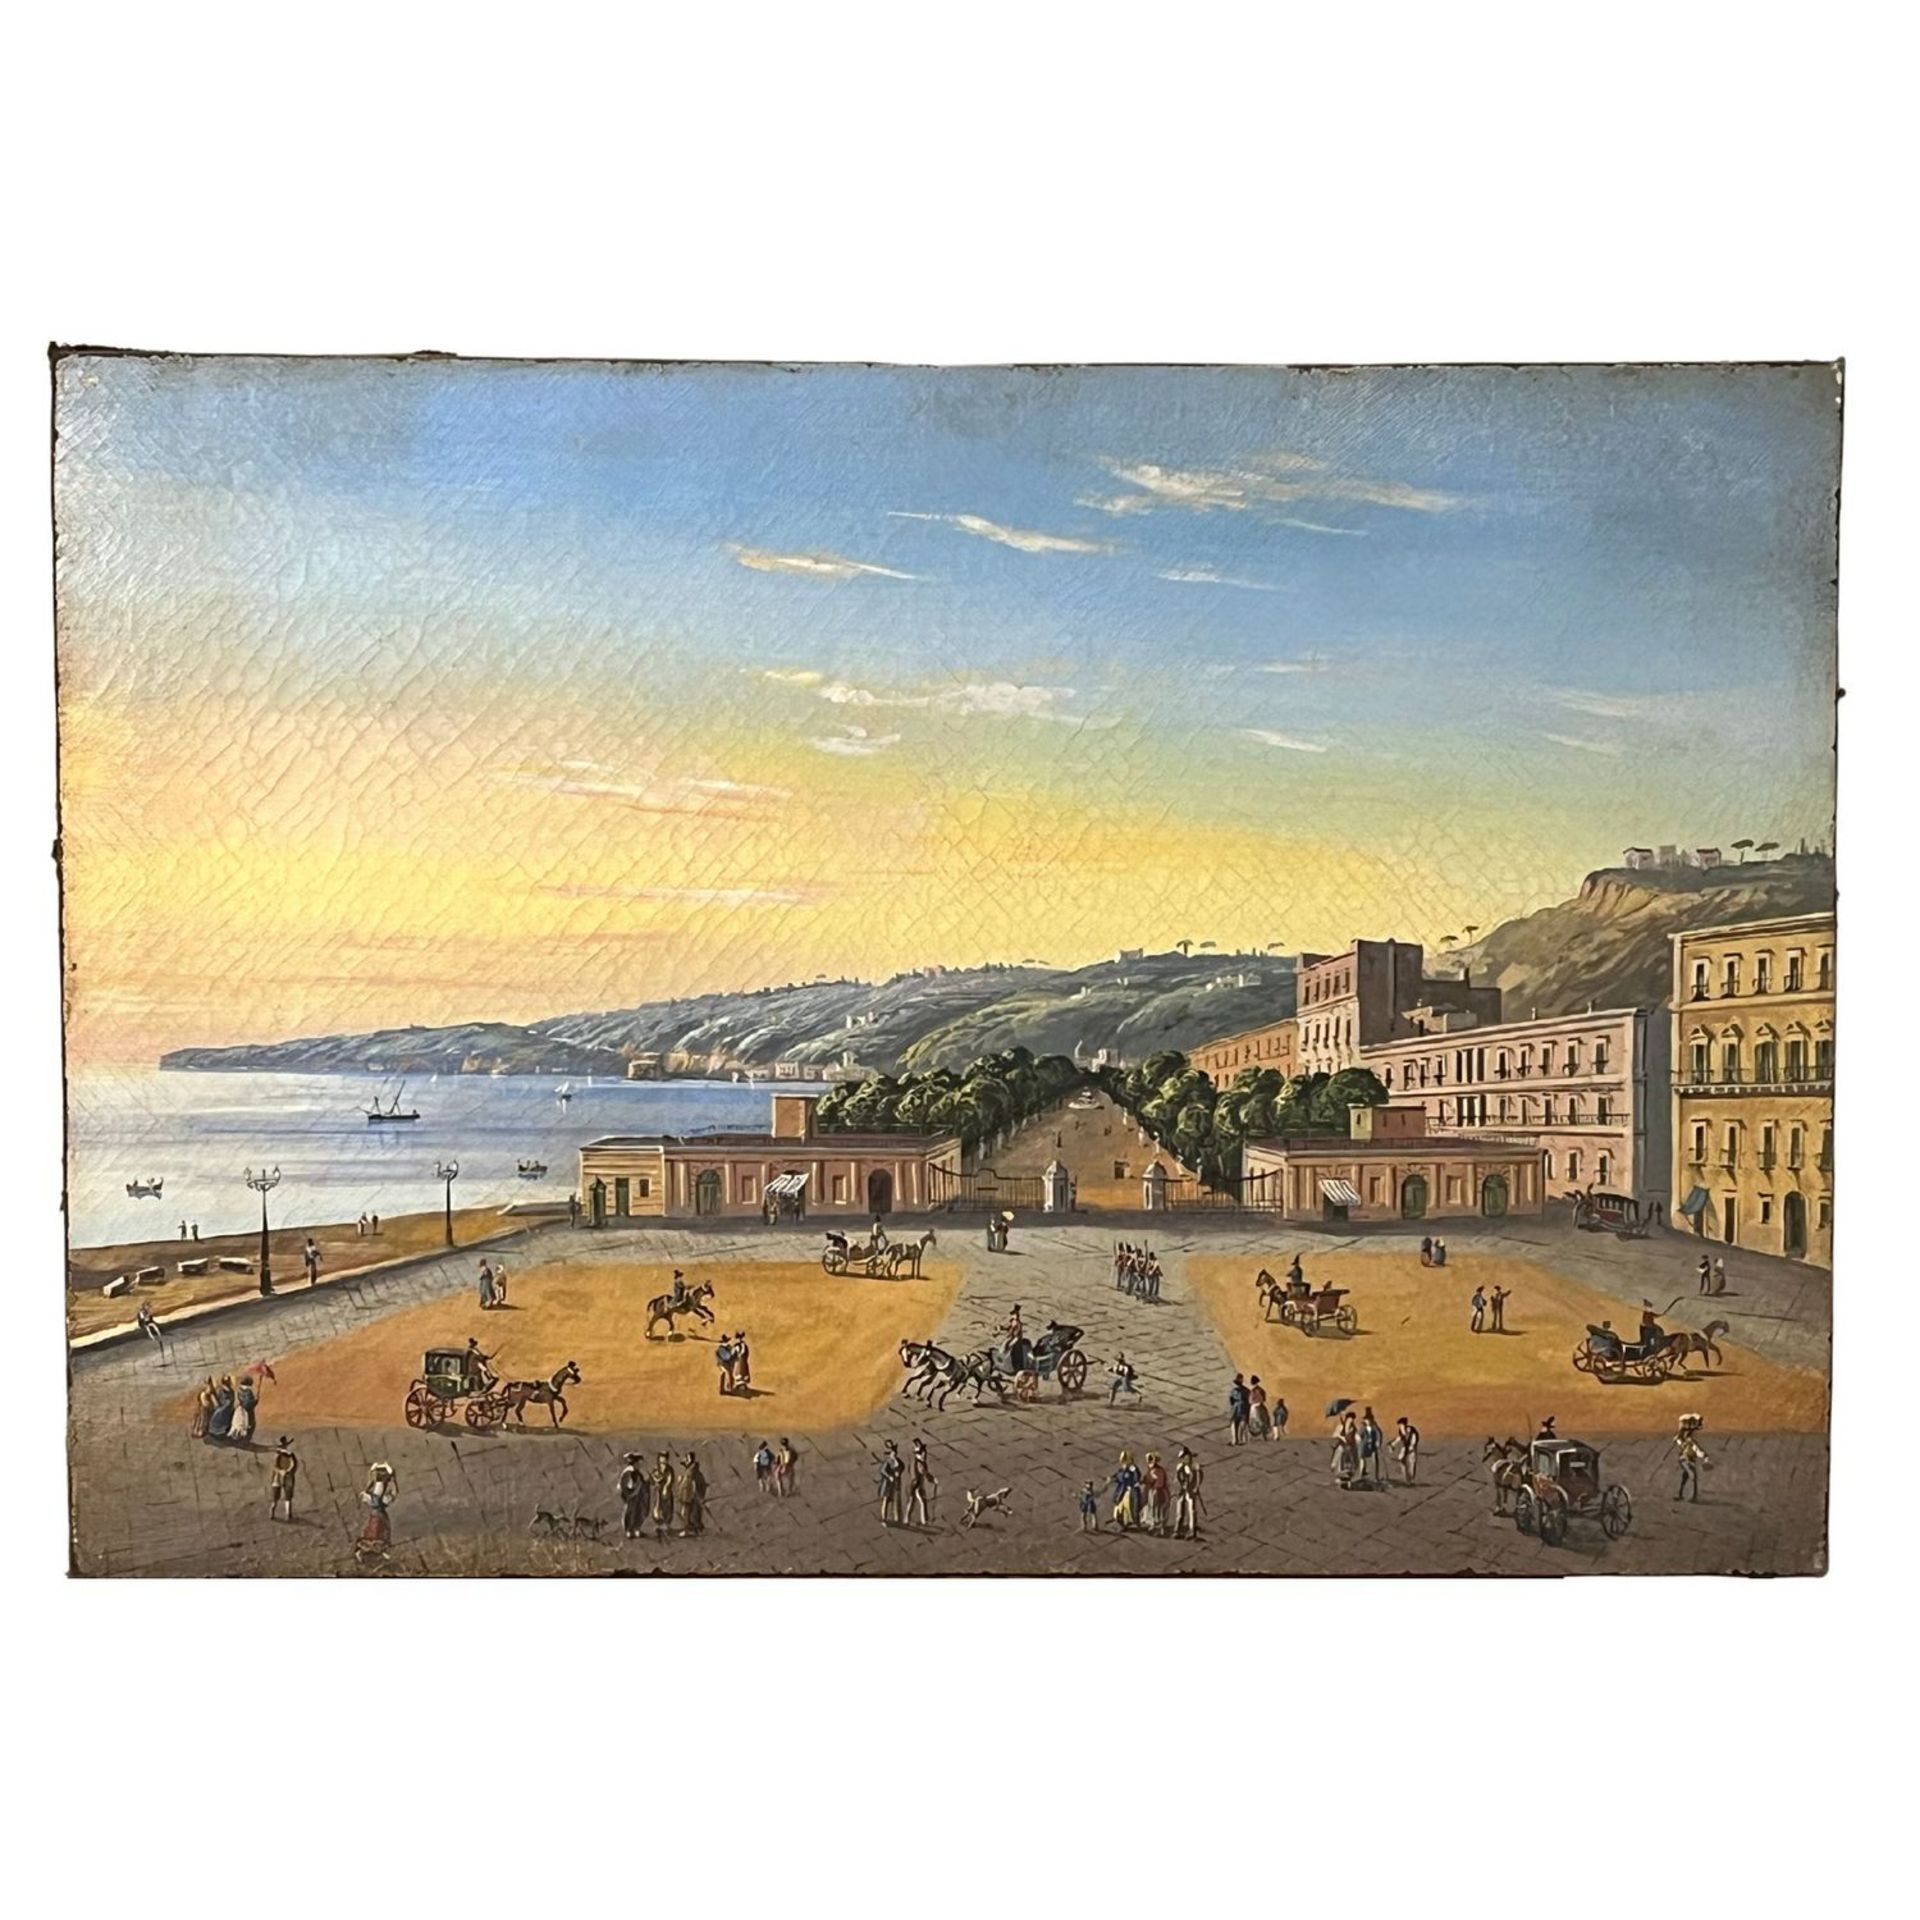 View of the Royal Palace in Naples